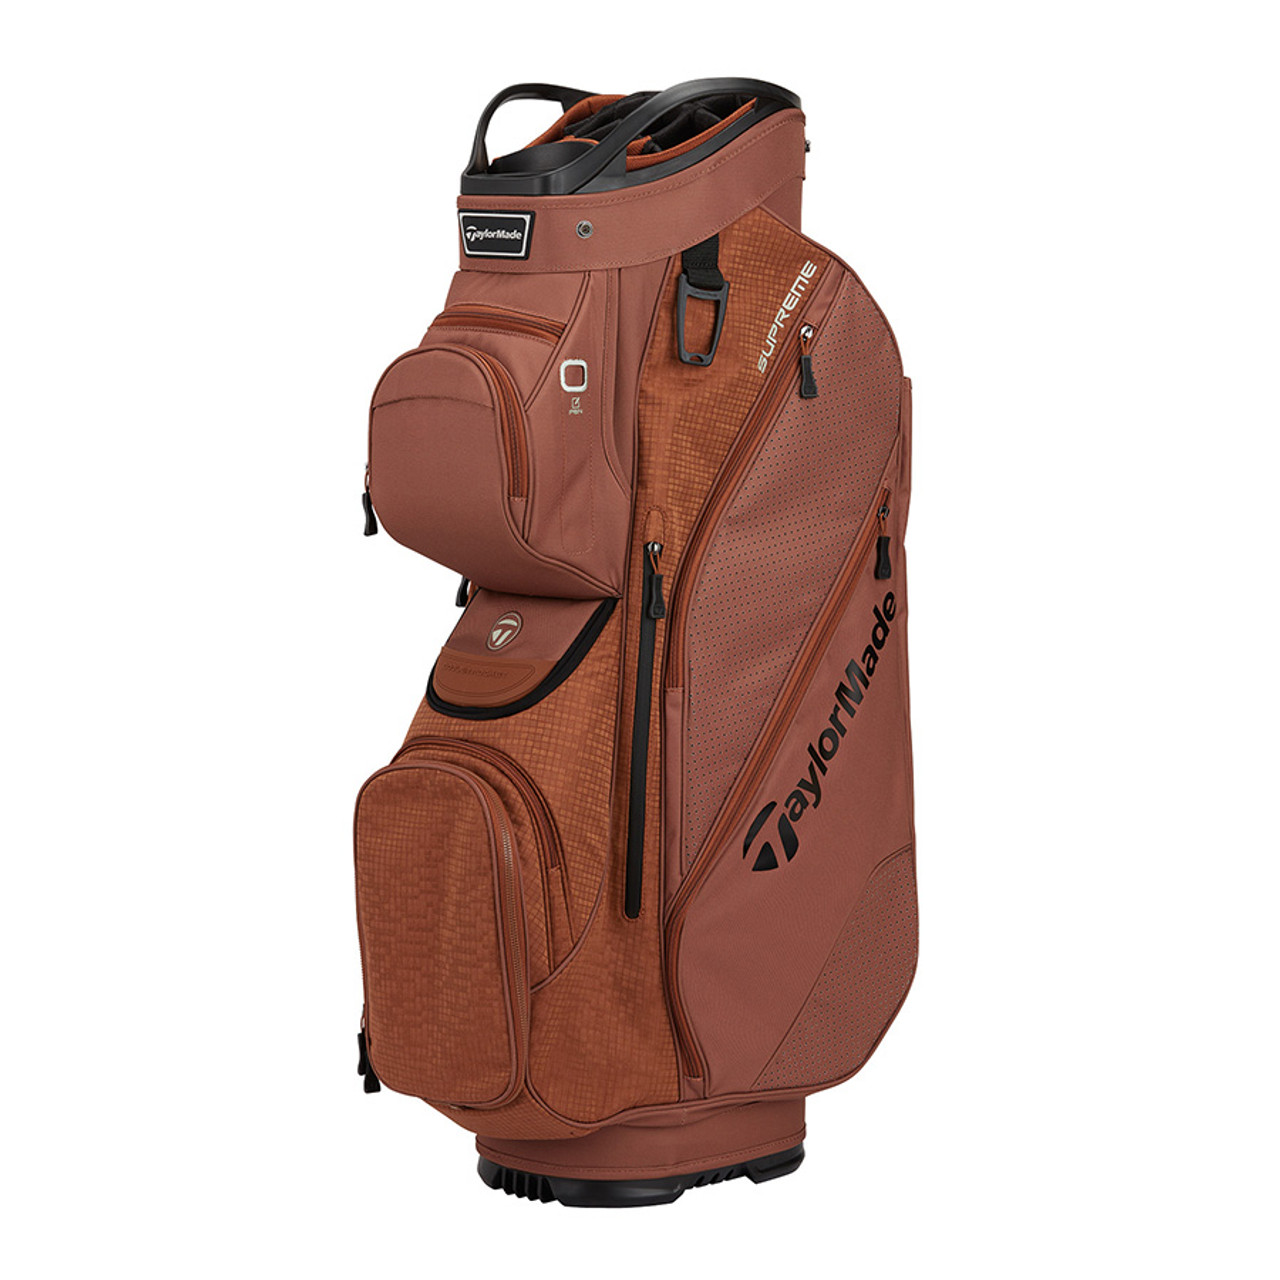 THE BEST CART BAGS OF 2022 | MyGolfSpy